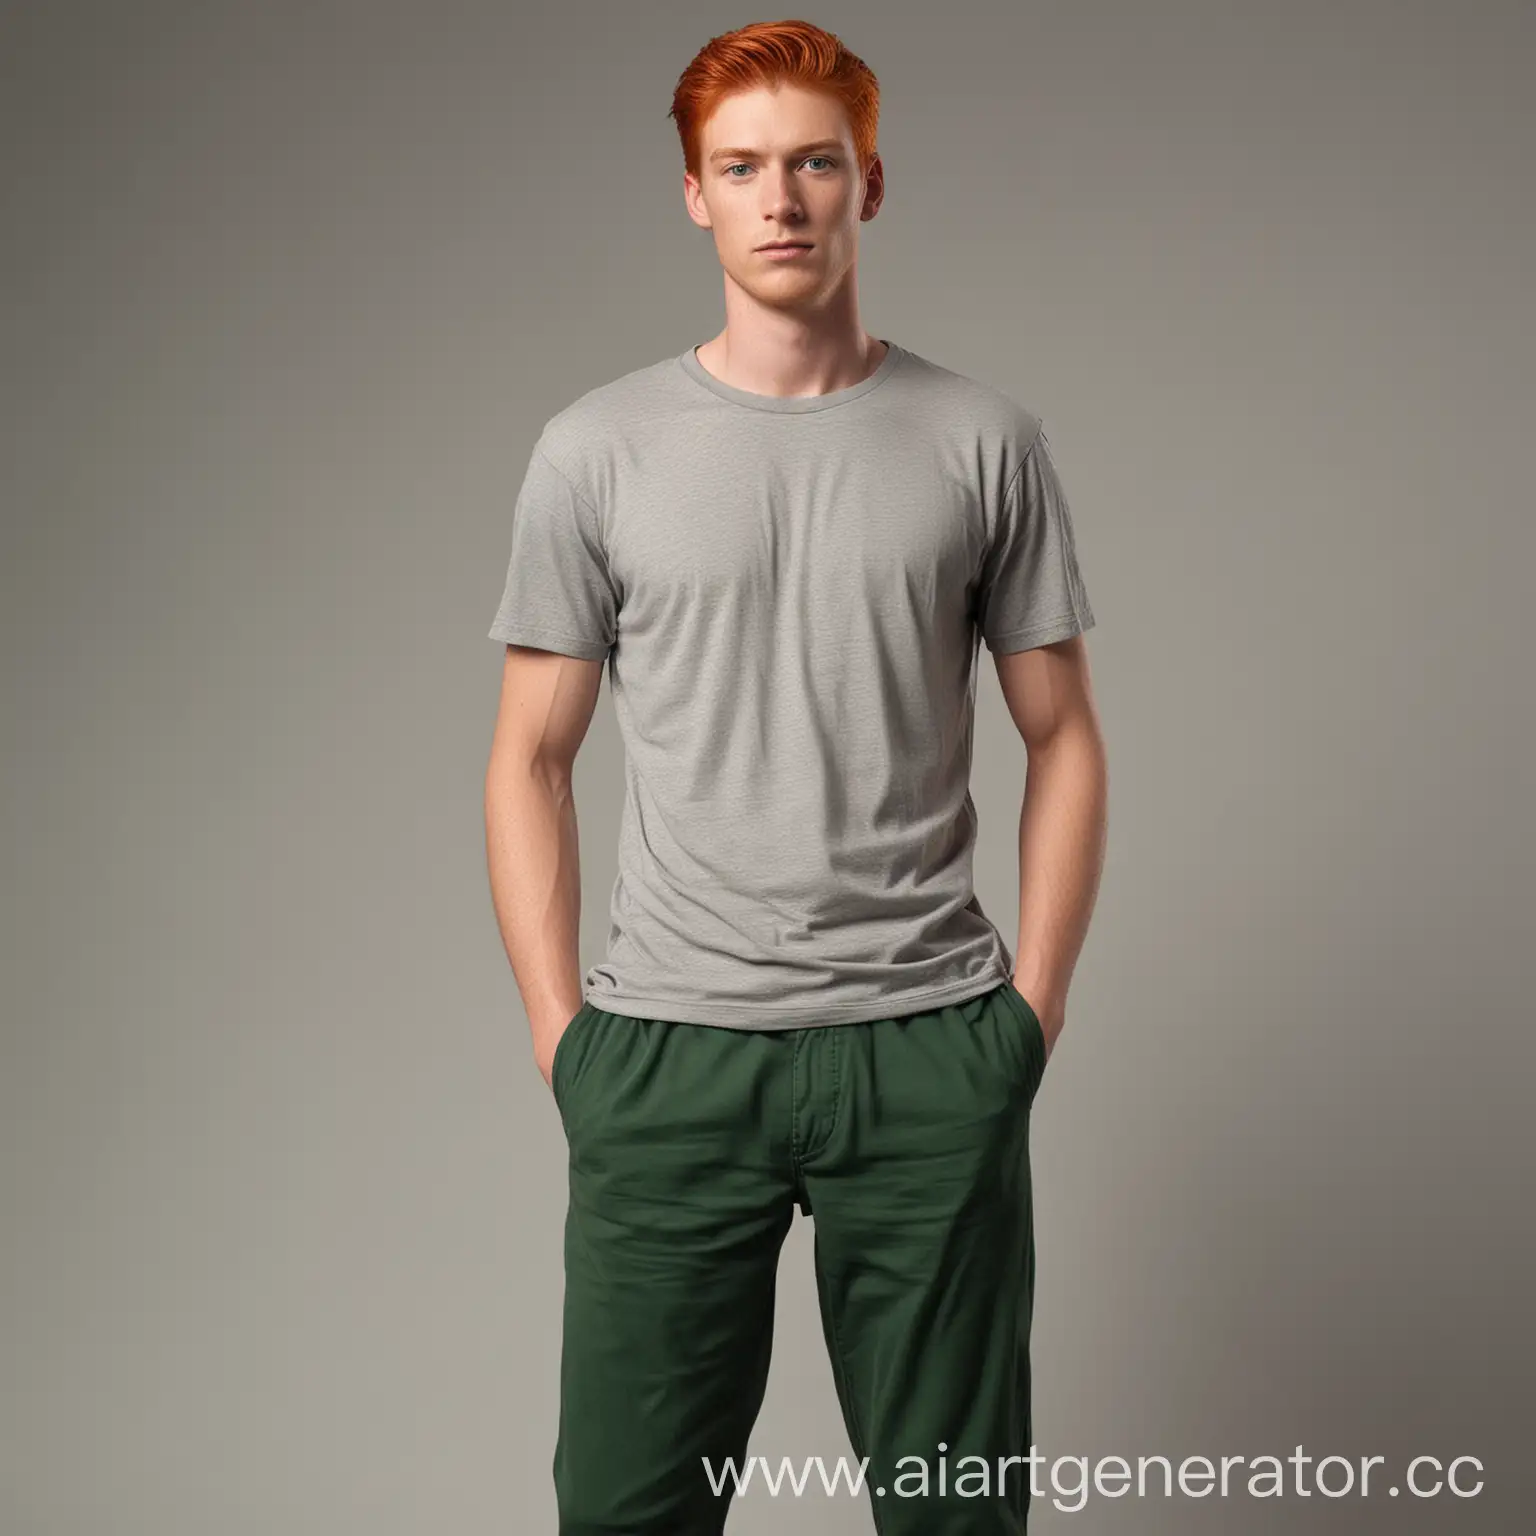 Young-RedHaired-Man-in-Casual-Attire